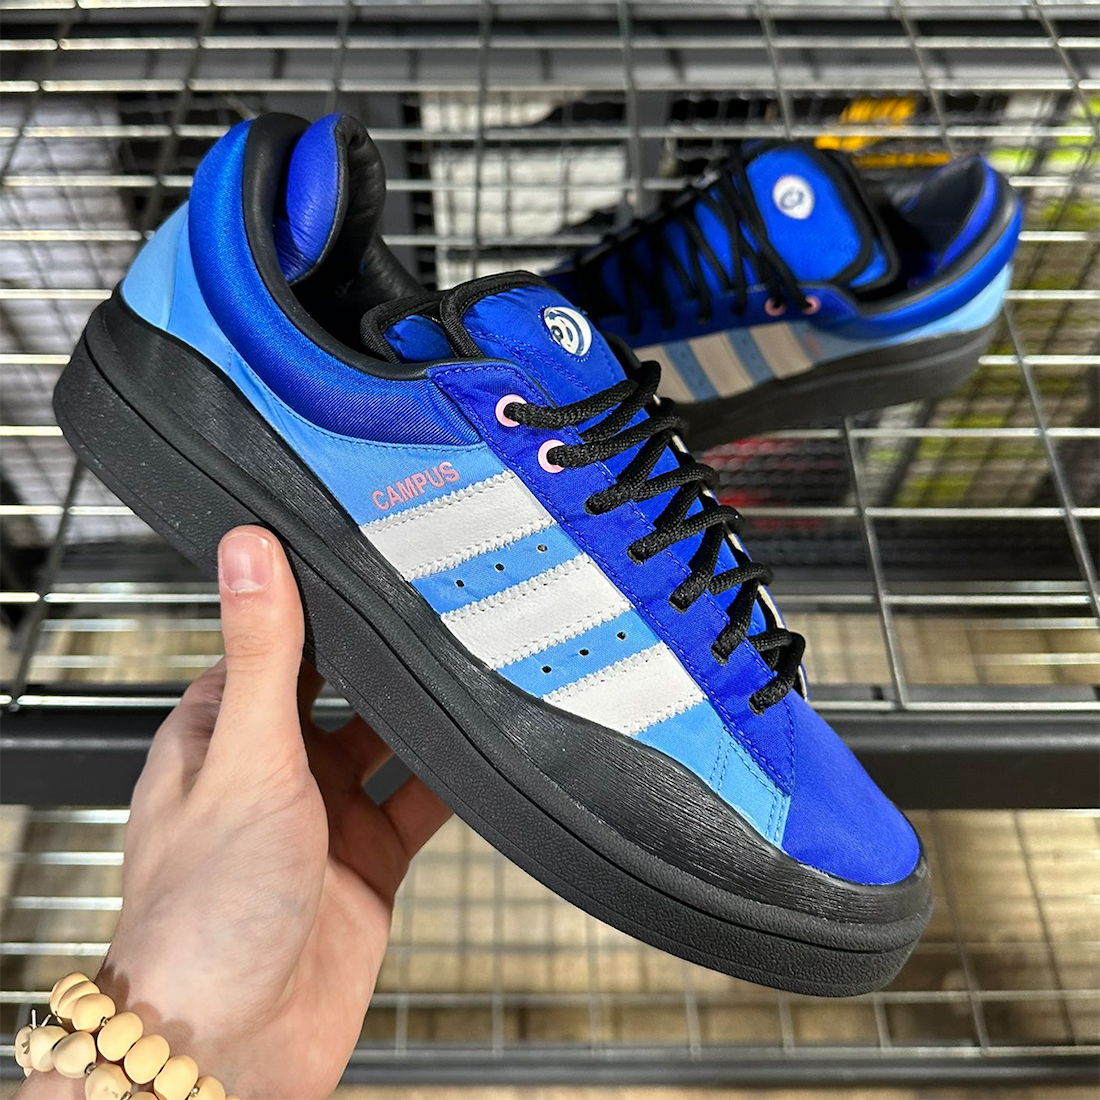 adidas shoes innovation center chicago | SBD | Bad x inserts adidas Campus Royal Blue Release Date